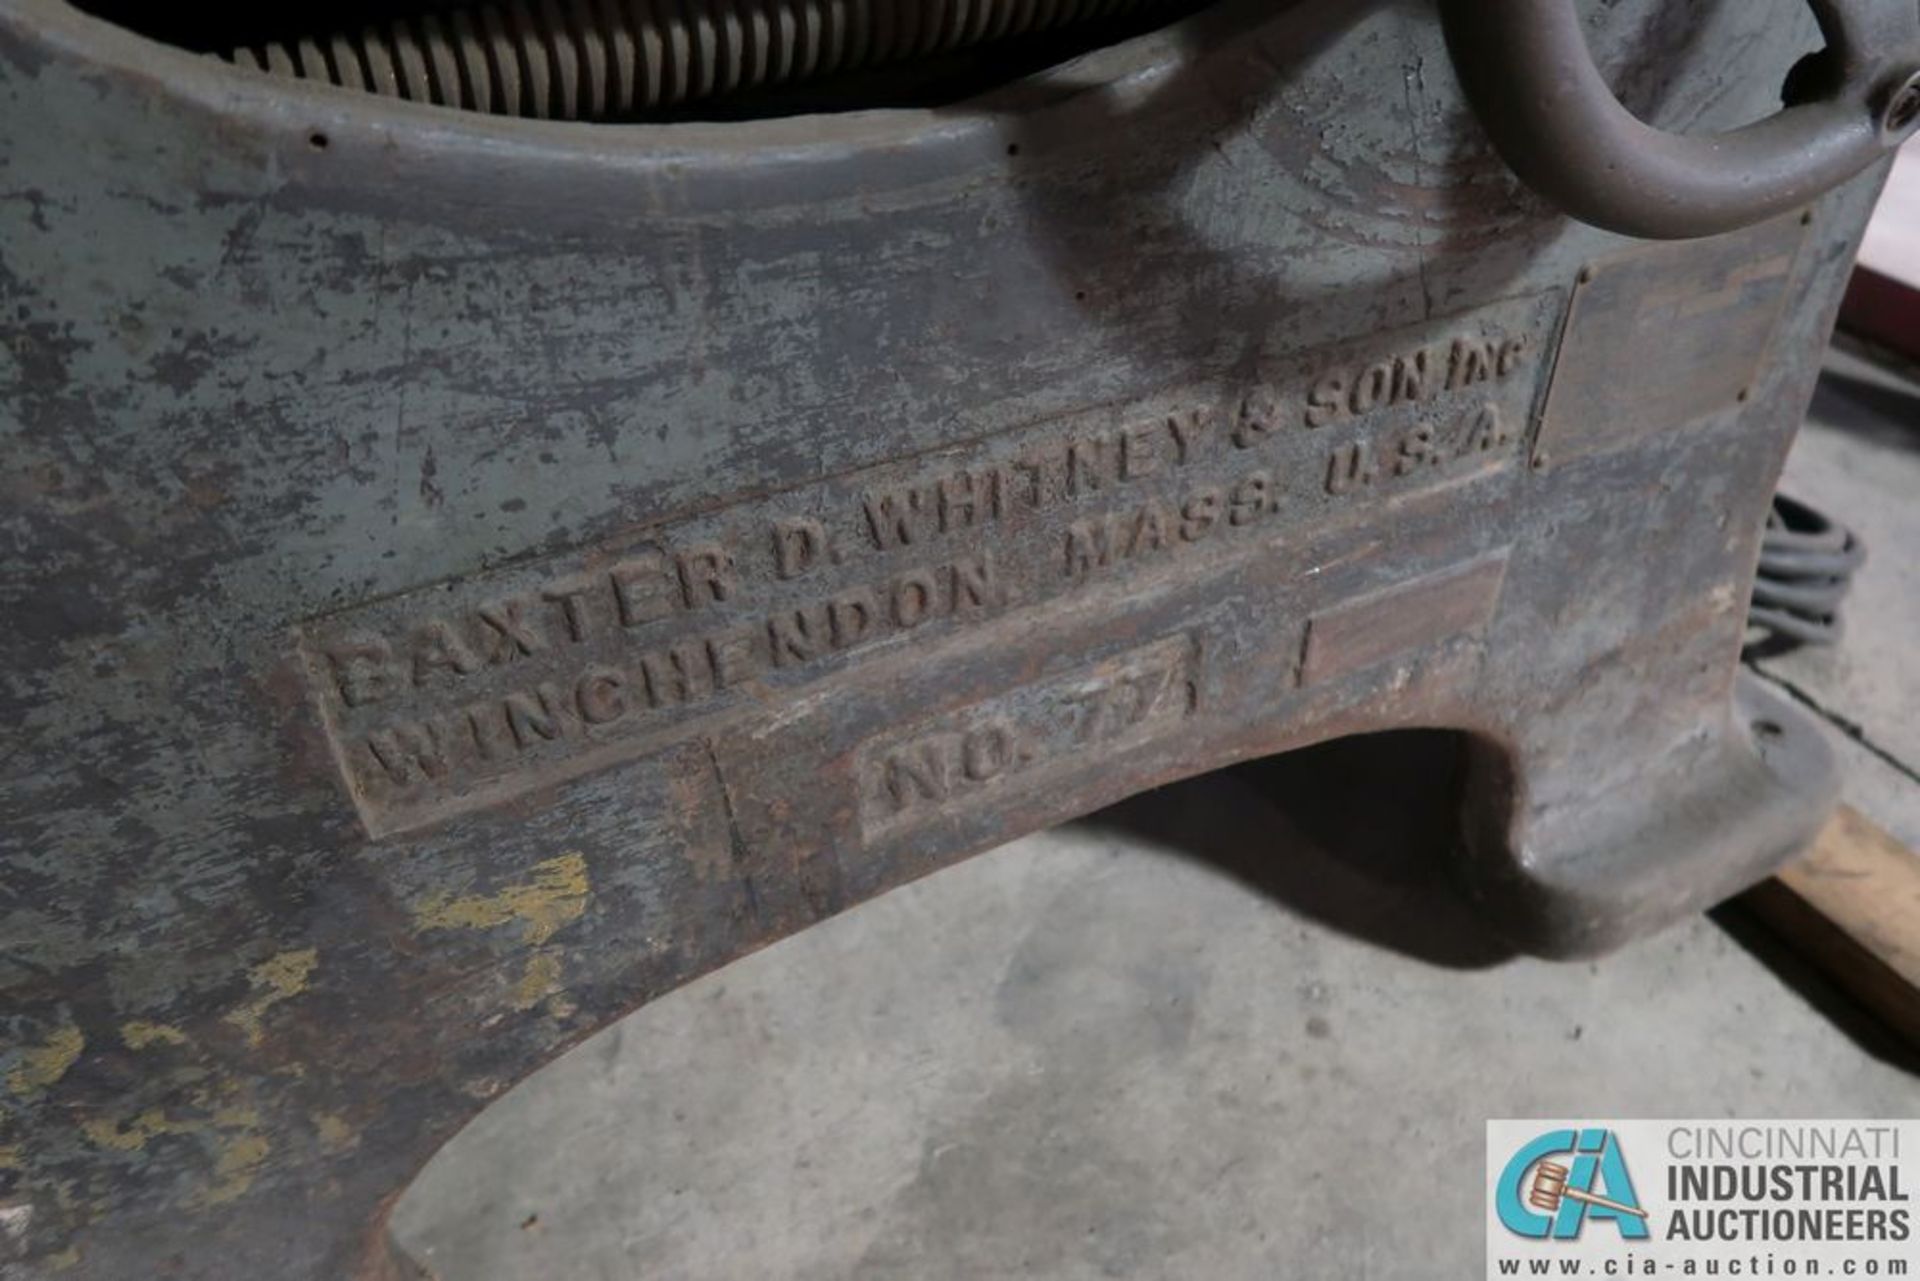 12" BAXTER D WHITNEY MODEL 77 HEAVY DUTY TABLE SAW; S/N 18610 - Image 3 of 3